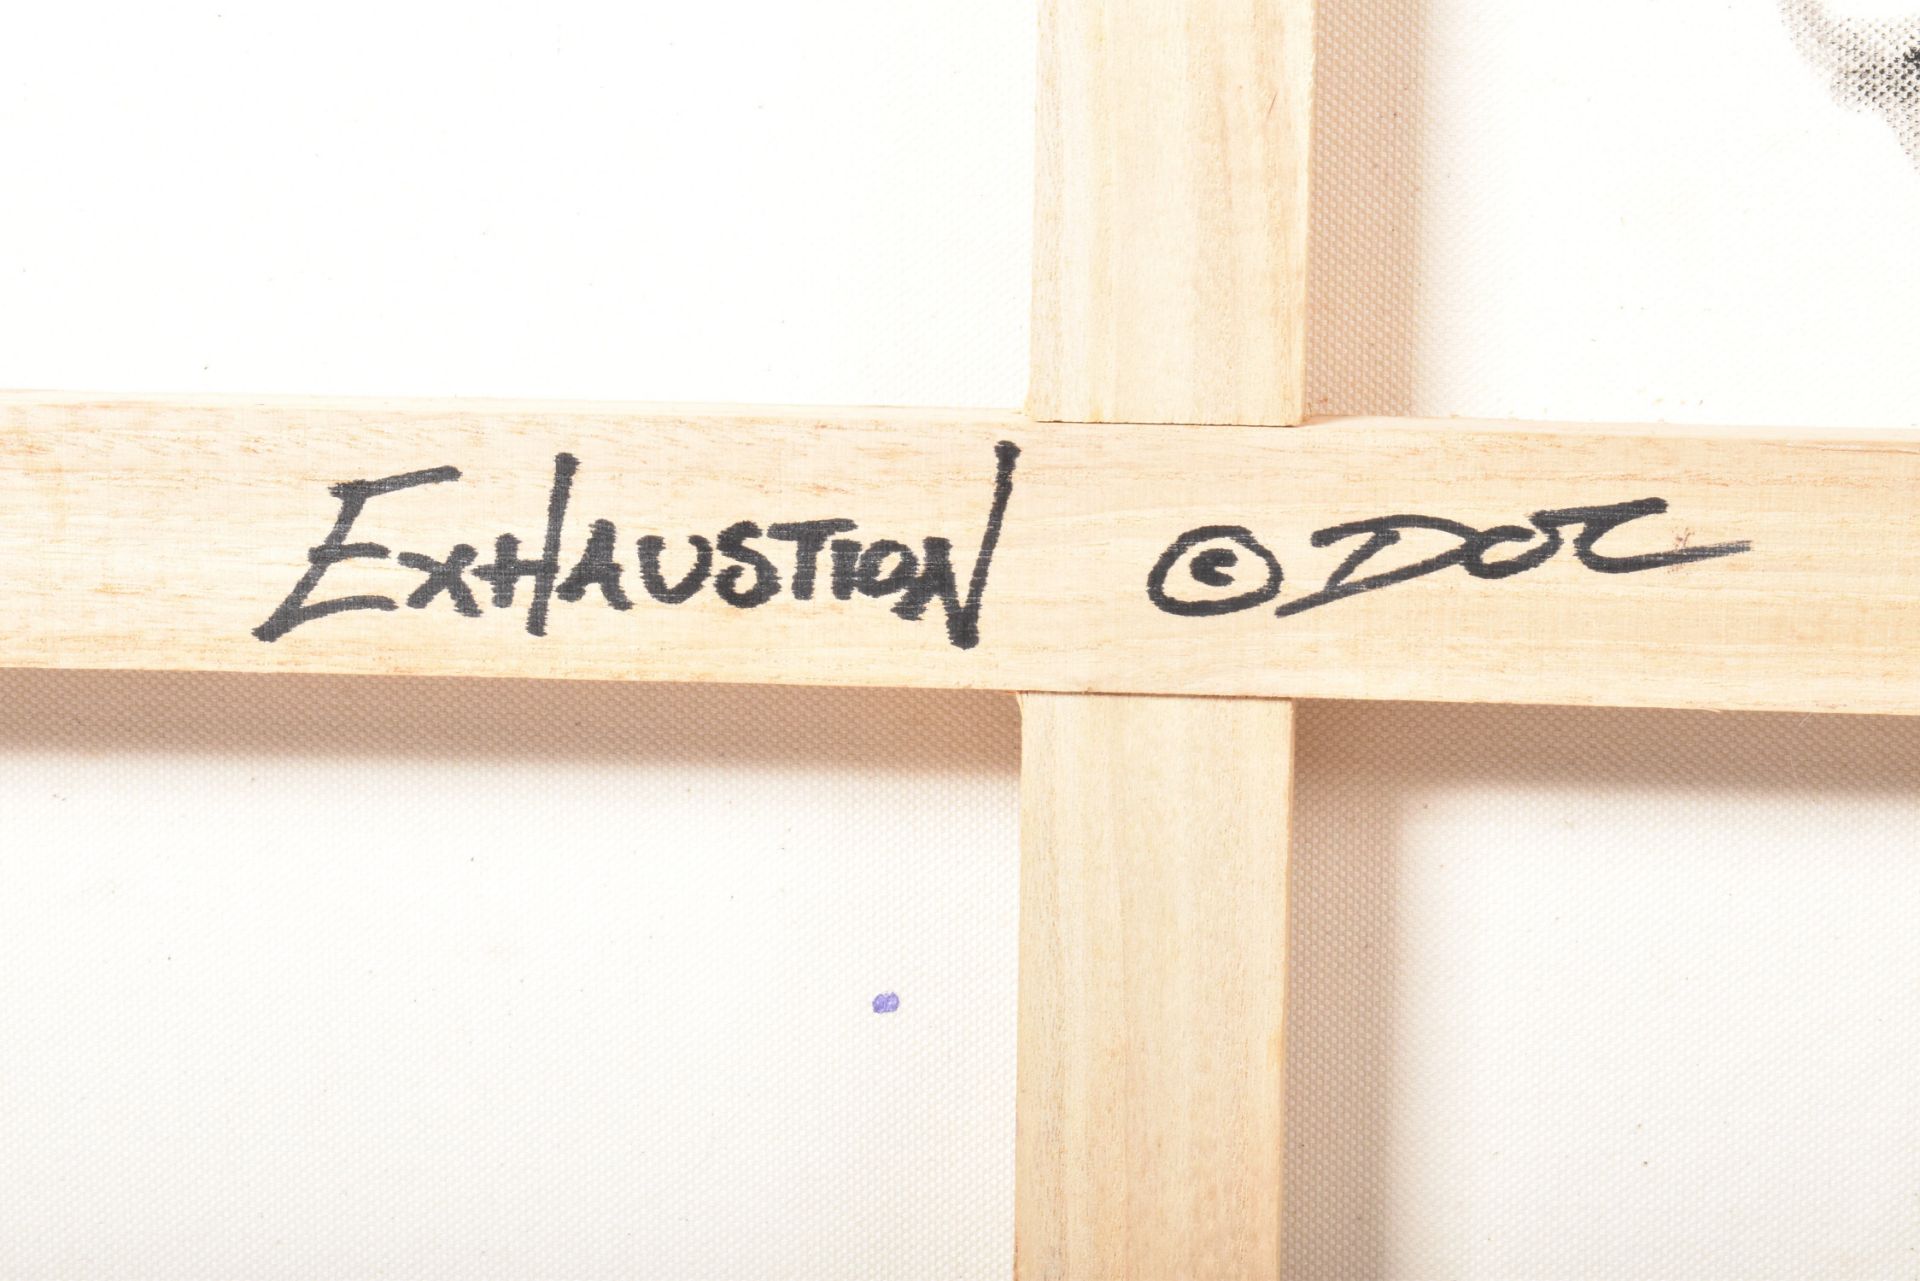 DANNY O'CONNOR (B.1981) - EXHAUSTION, 2008 - Image 9 of 11